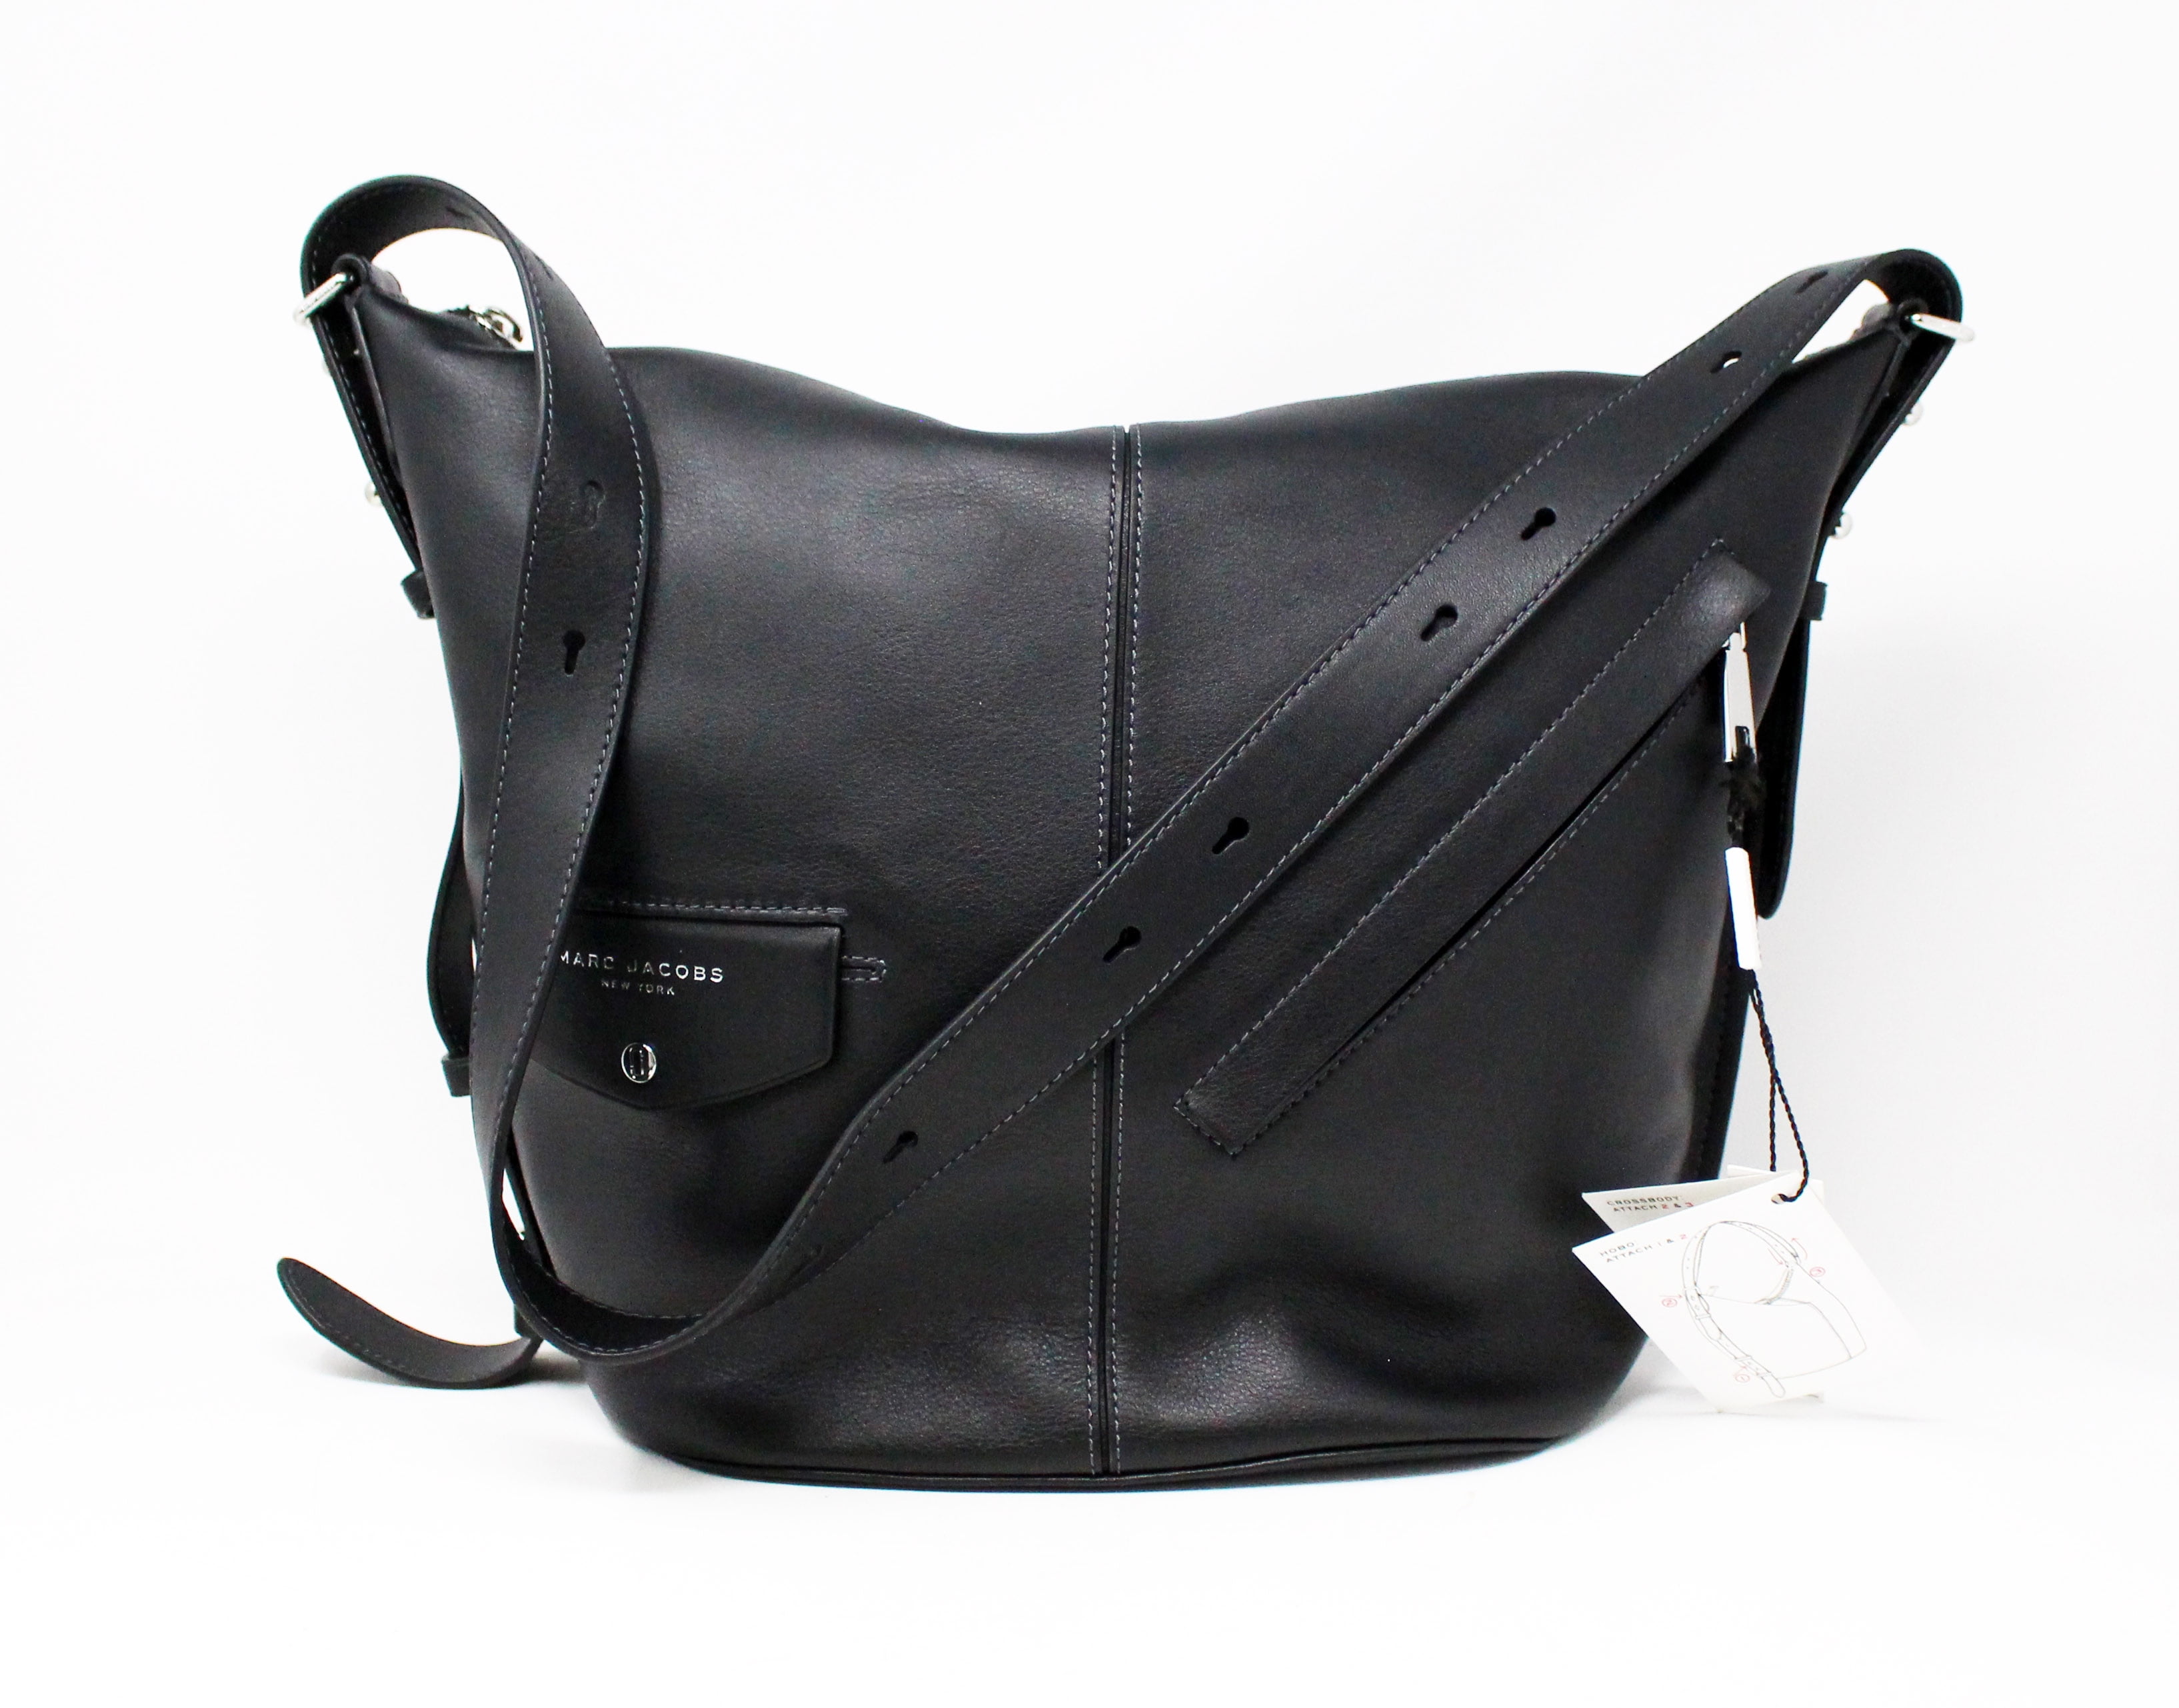 Marc Jacobs M0010930 The Sling Convertible Leather Black Bag